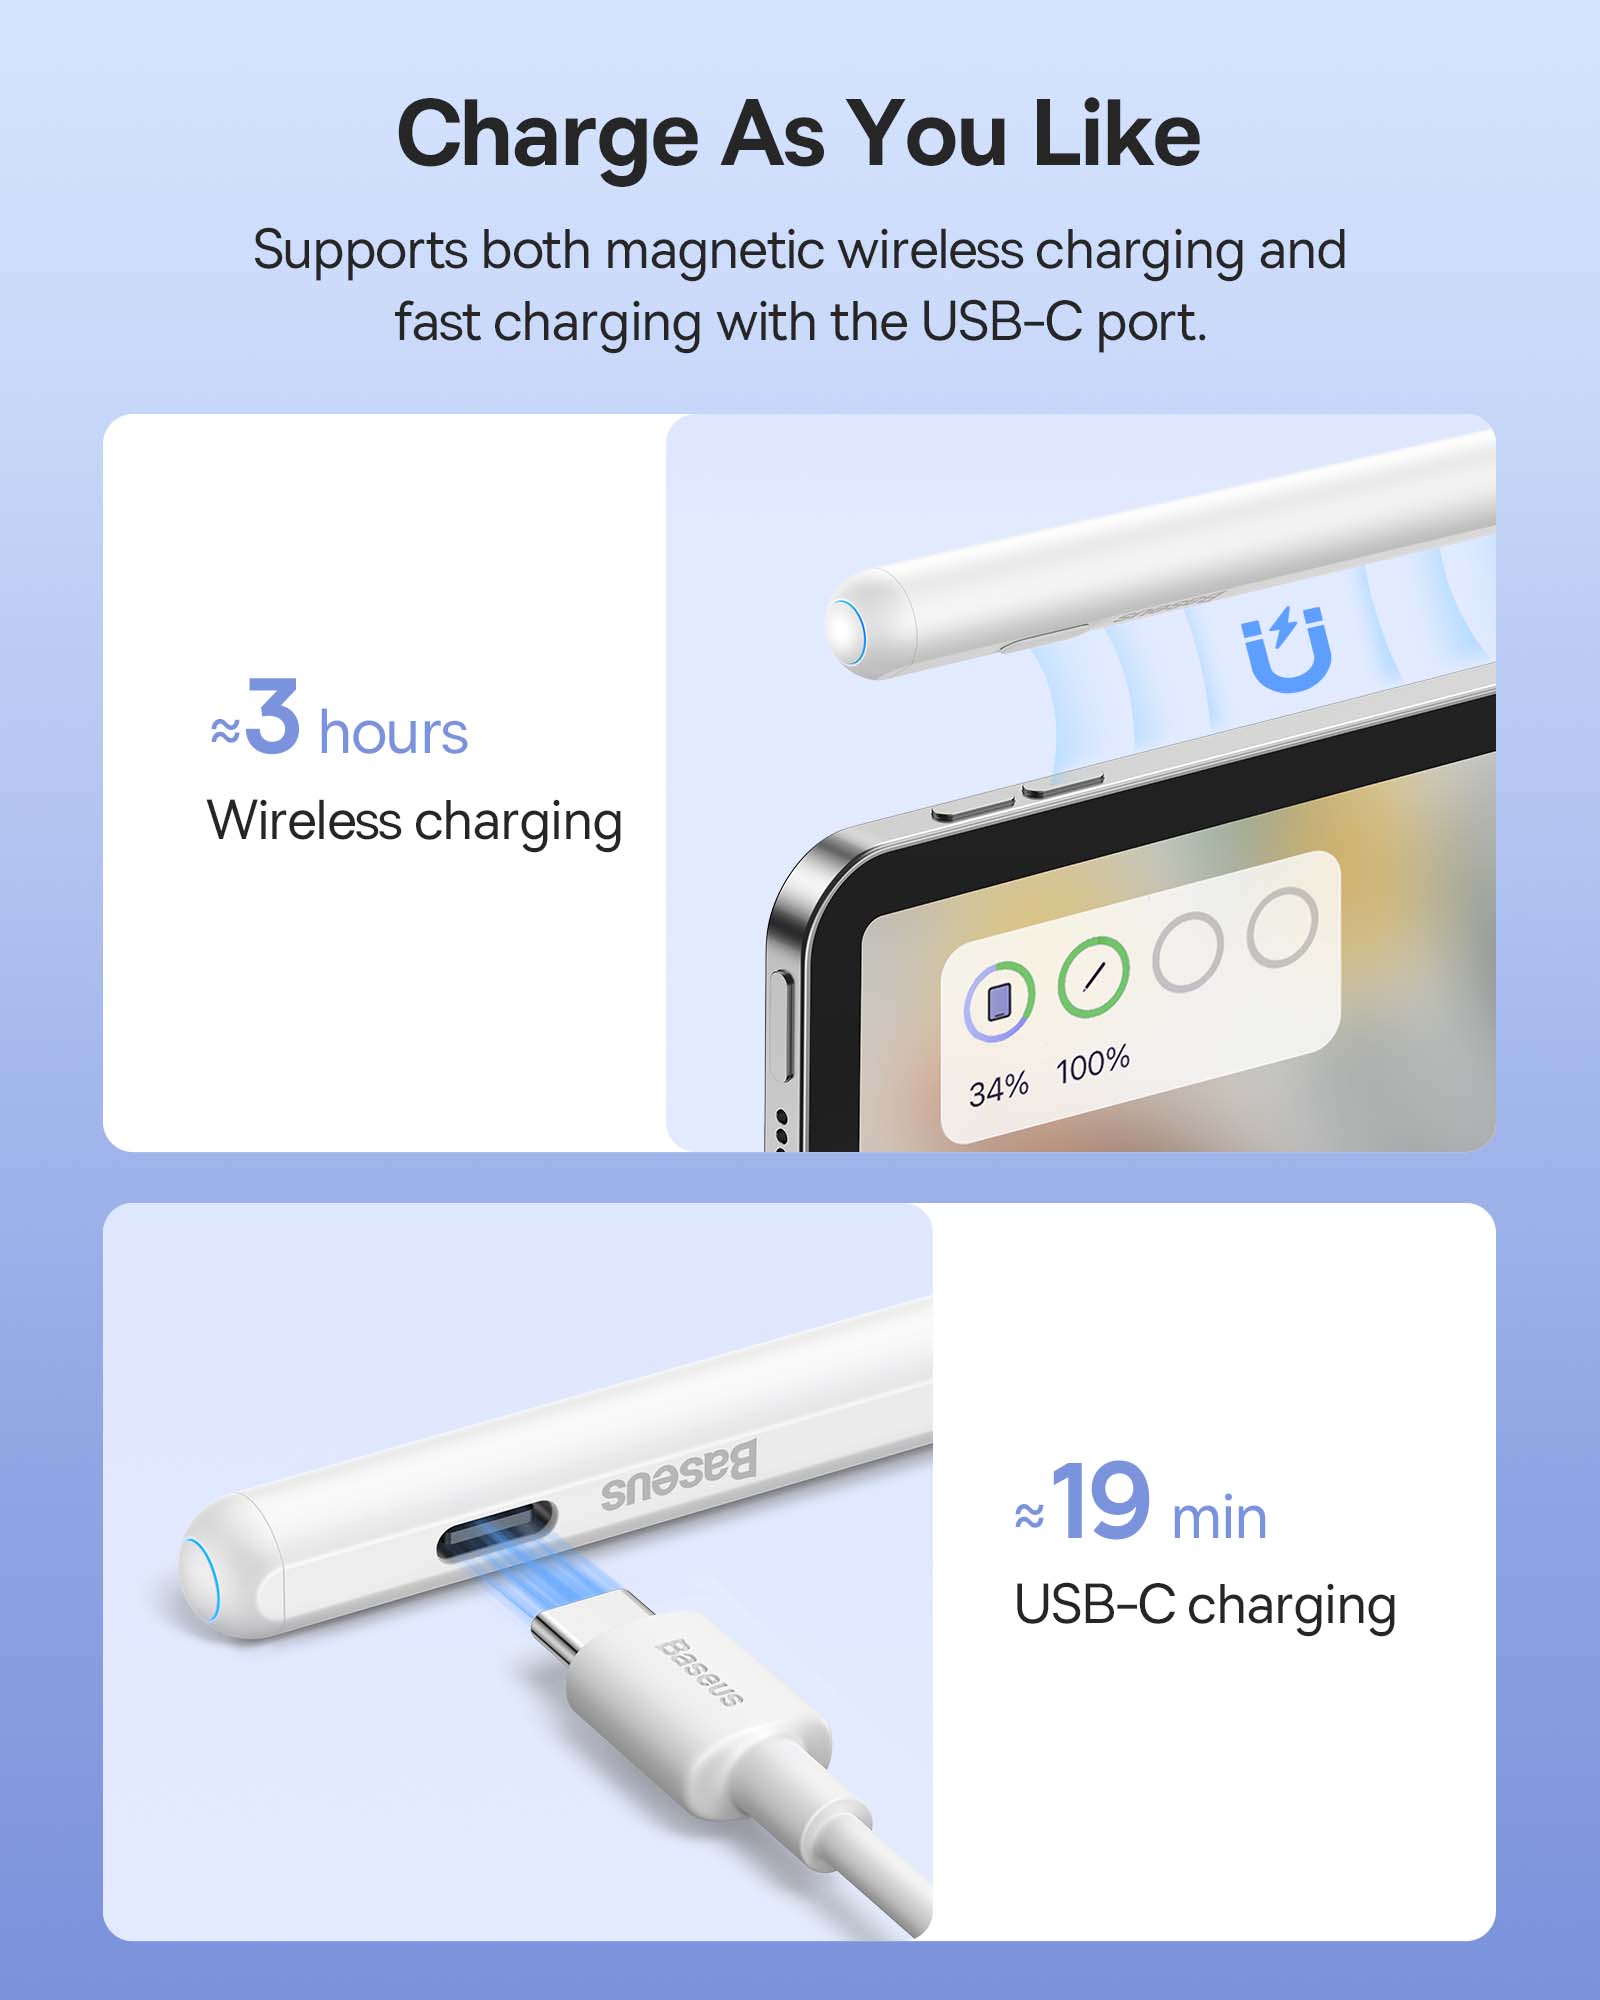 Bút Cảm Ứng Sạc 2 Chế Độ Baseus Smooth Writing 2 Series Dual Charging Stylus, White (Active Version Wireless/Cabled Charging, with Simple Series Data Cable White and active pen tip)(Hàng chính hãng)